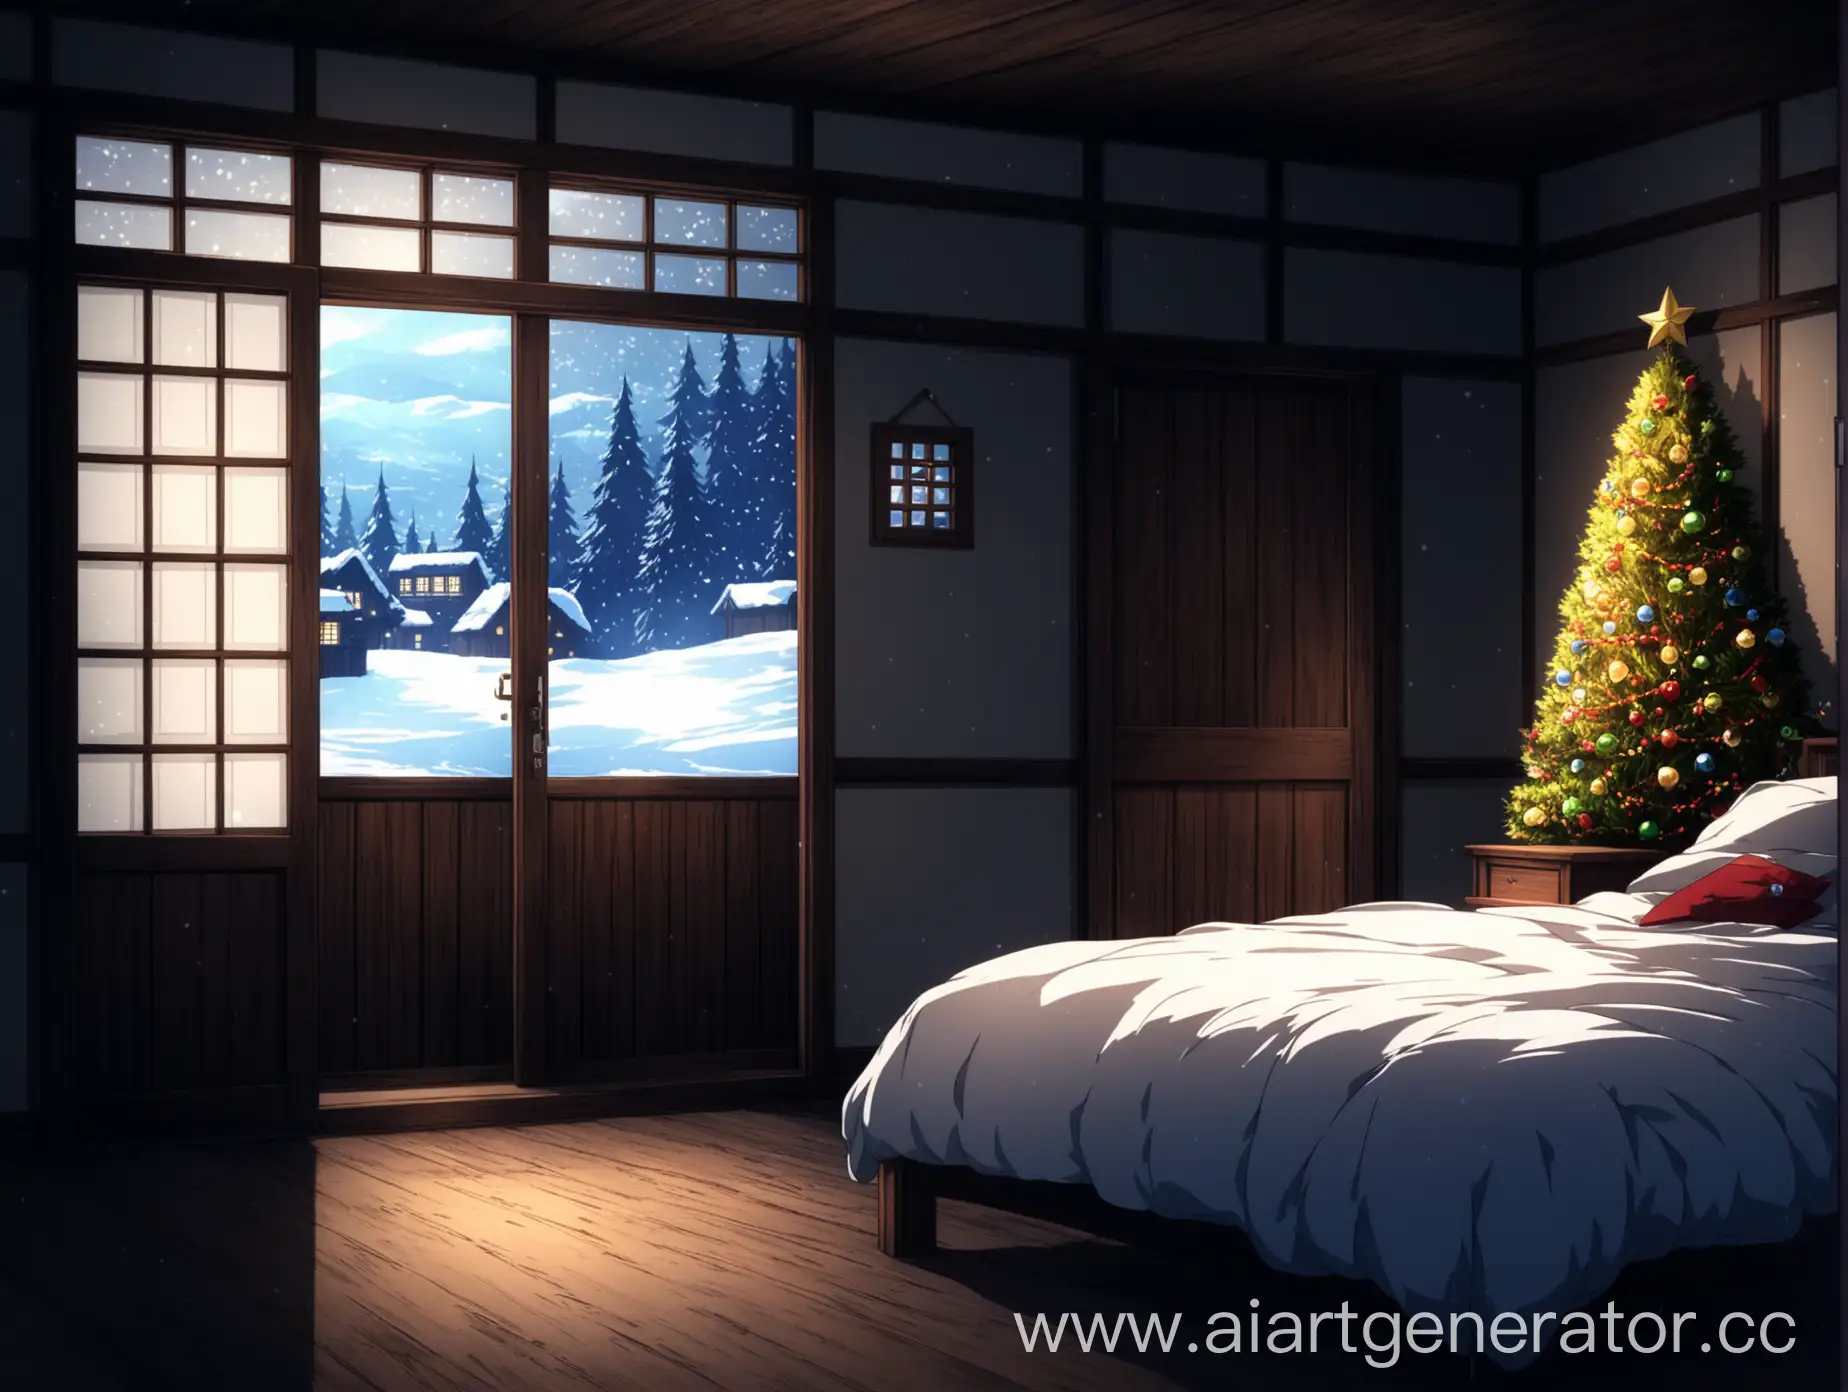 AnimeStyle-Winter-Bedroom-with-Festive-Outdoor-Setting